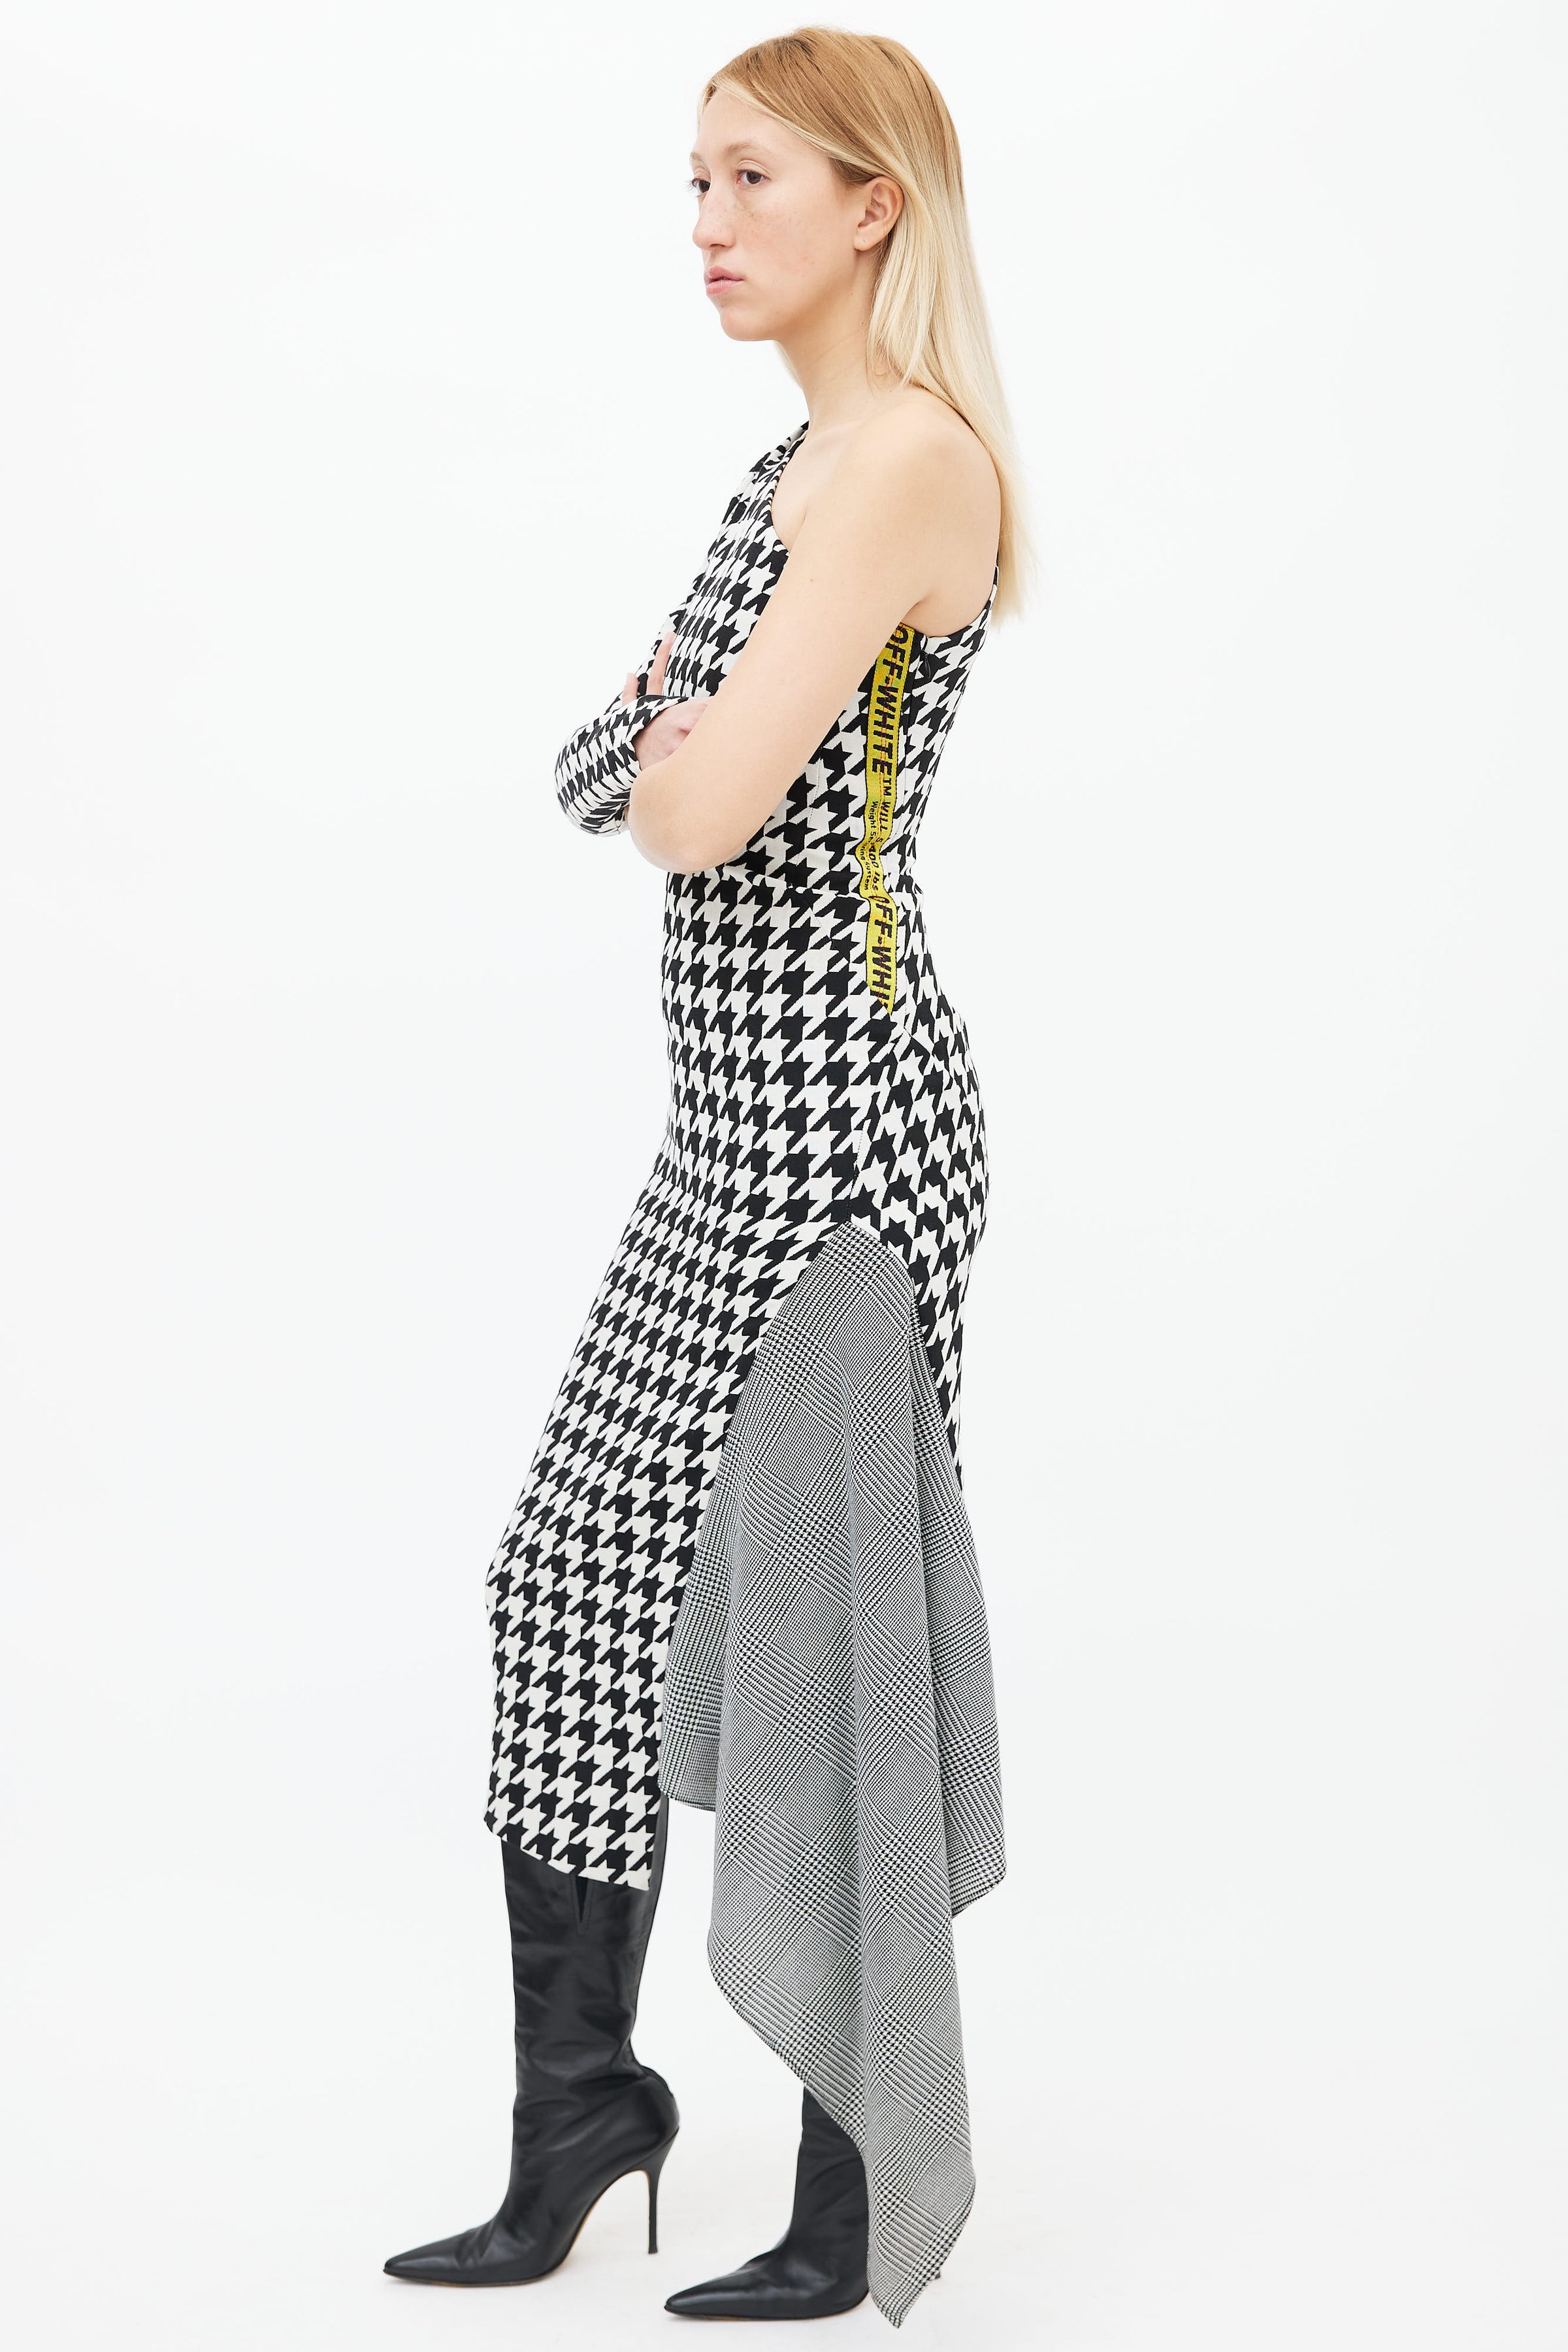 Off-White // Pre-Fall 2018 Black & White Multi Houndstooth One